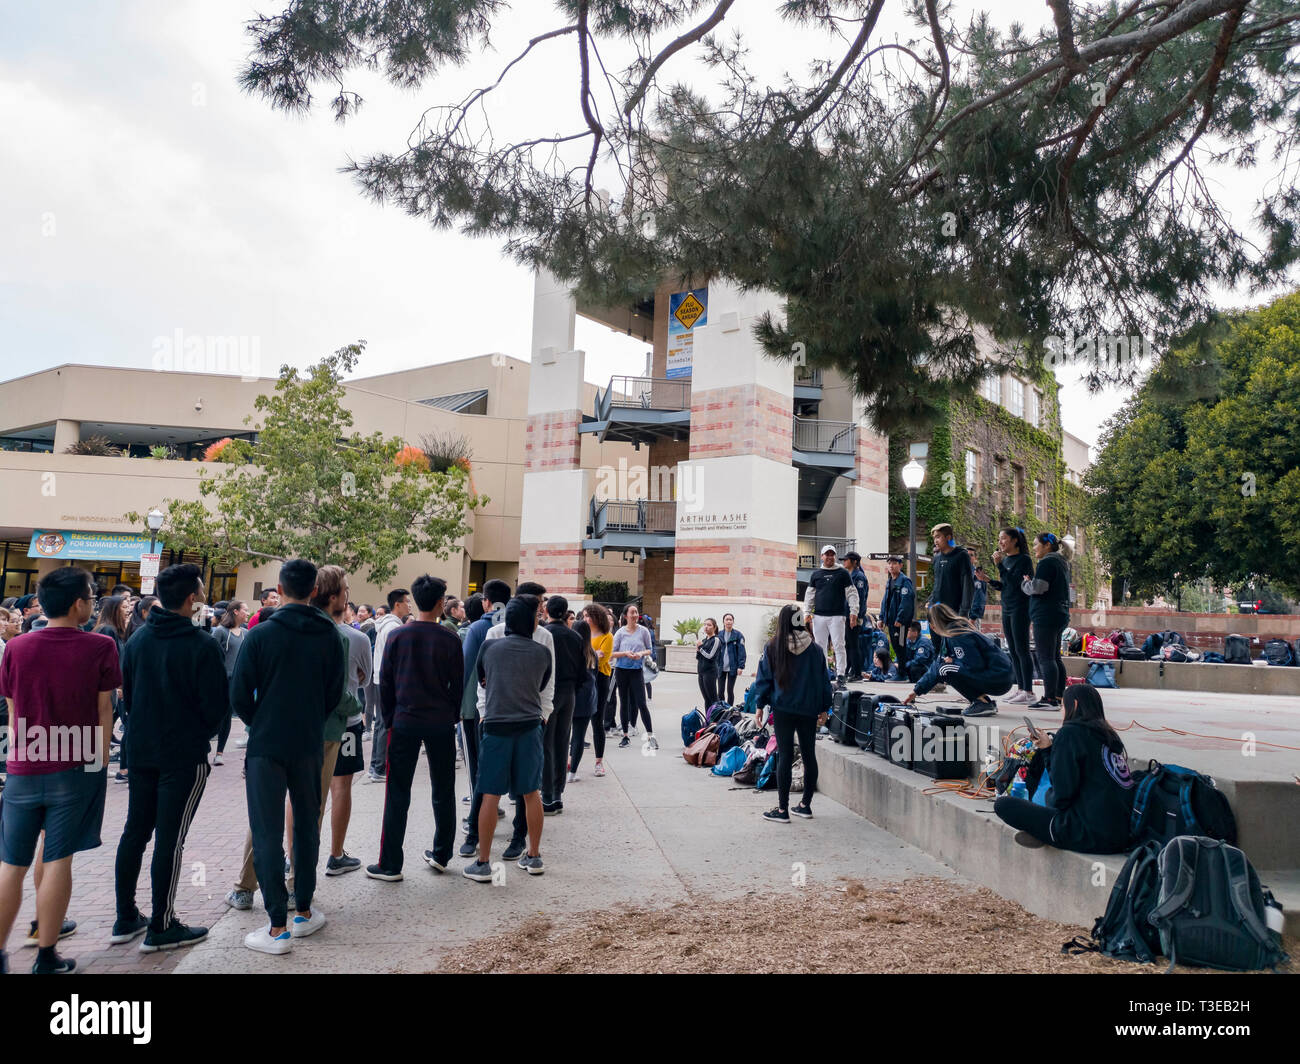 Los Angeles, APR 4: Many student event at UCLA on APR 4, 2019 at Los Angeles, California Stock Photo